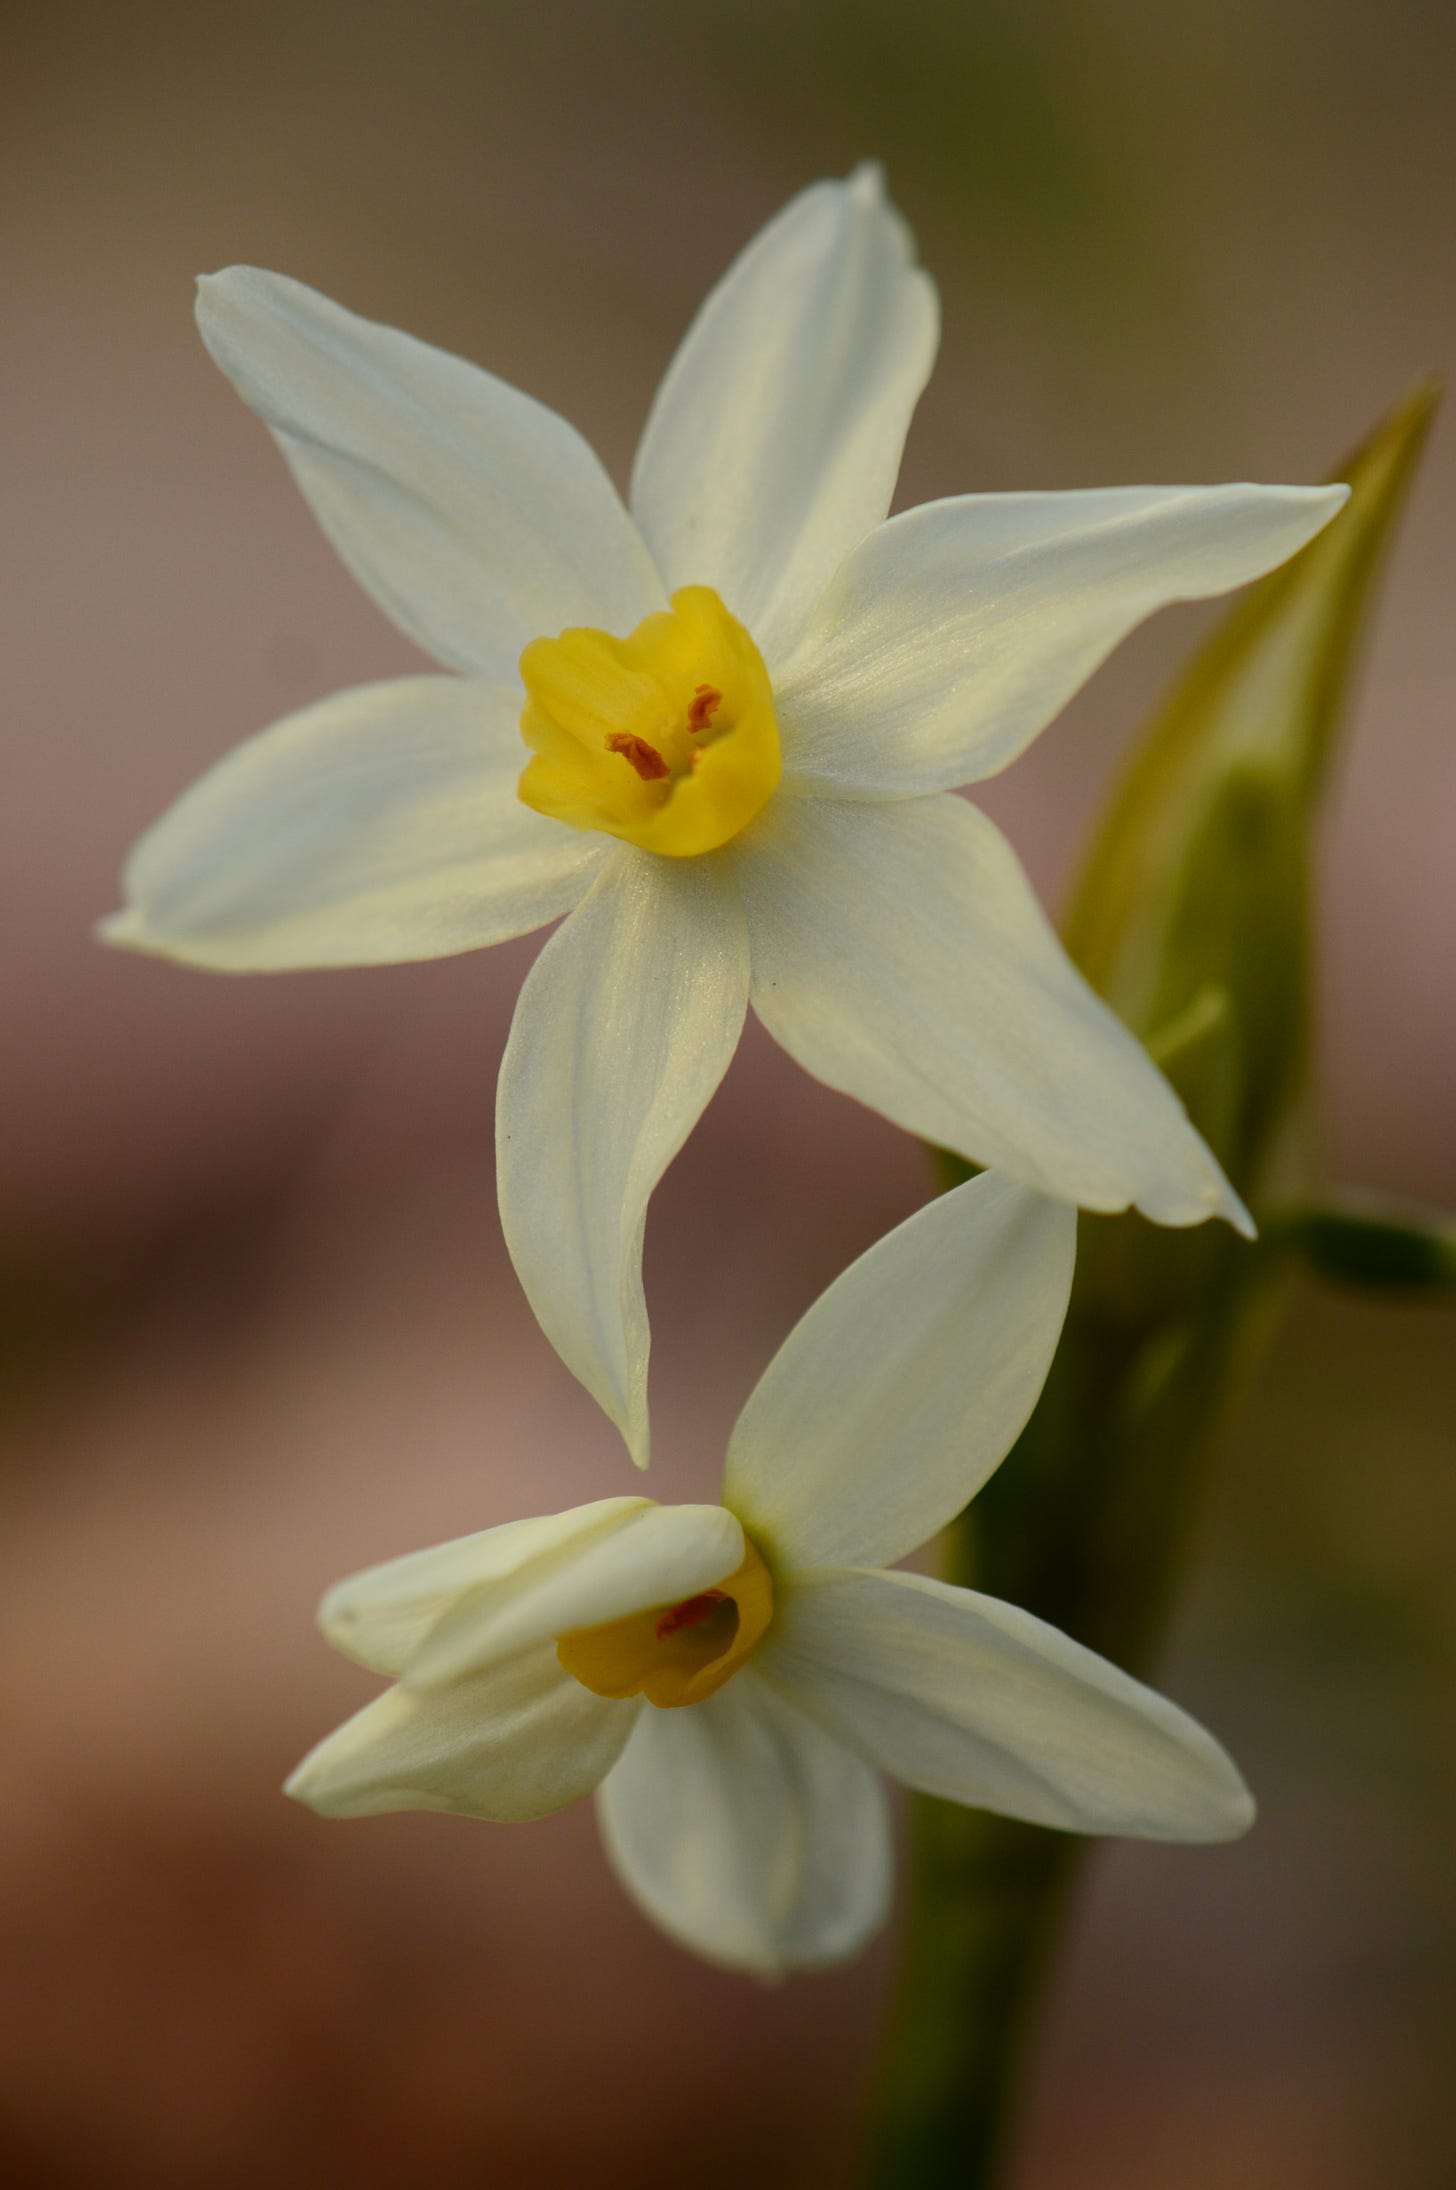 a close-up of two narcissus flowers blooming from one stalk. They have slender white petals and small yellow cups. The lower bloom is just opening and still has a petal partially obscuring the cup.